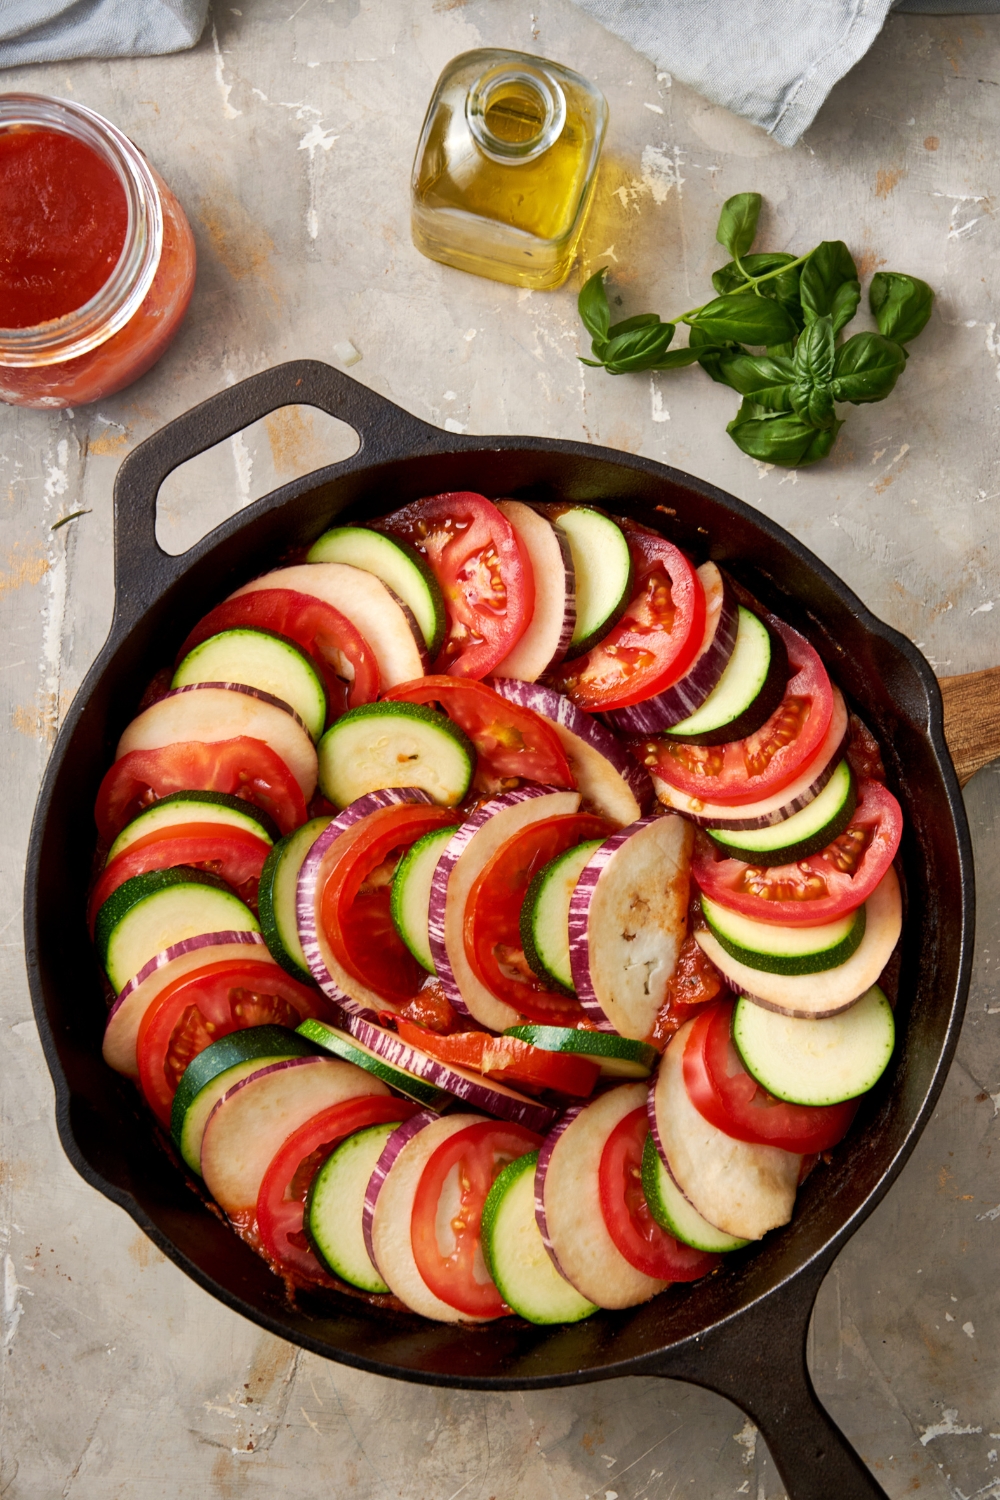 A cast iron pan is full of sliced vegetables ready to be cooked.